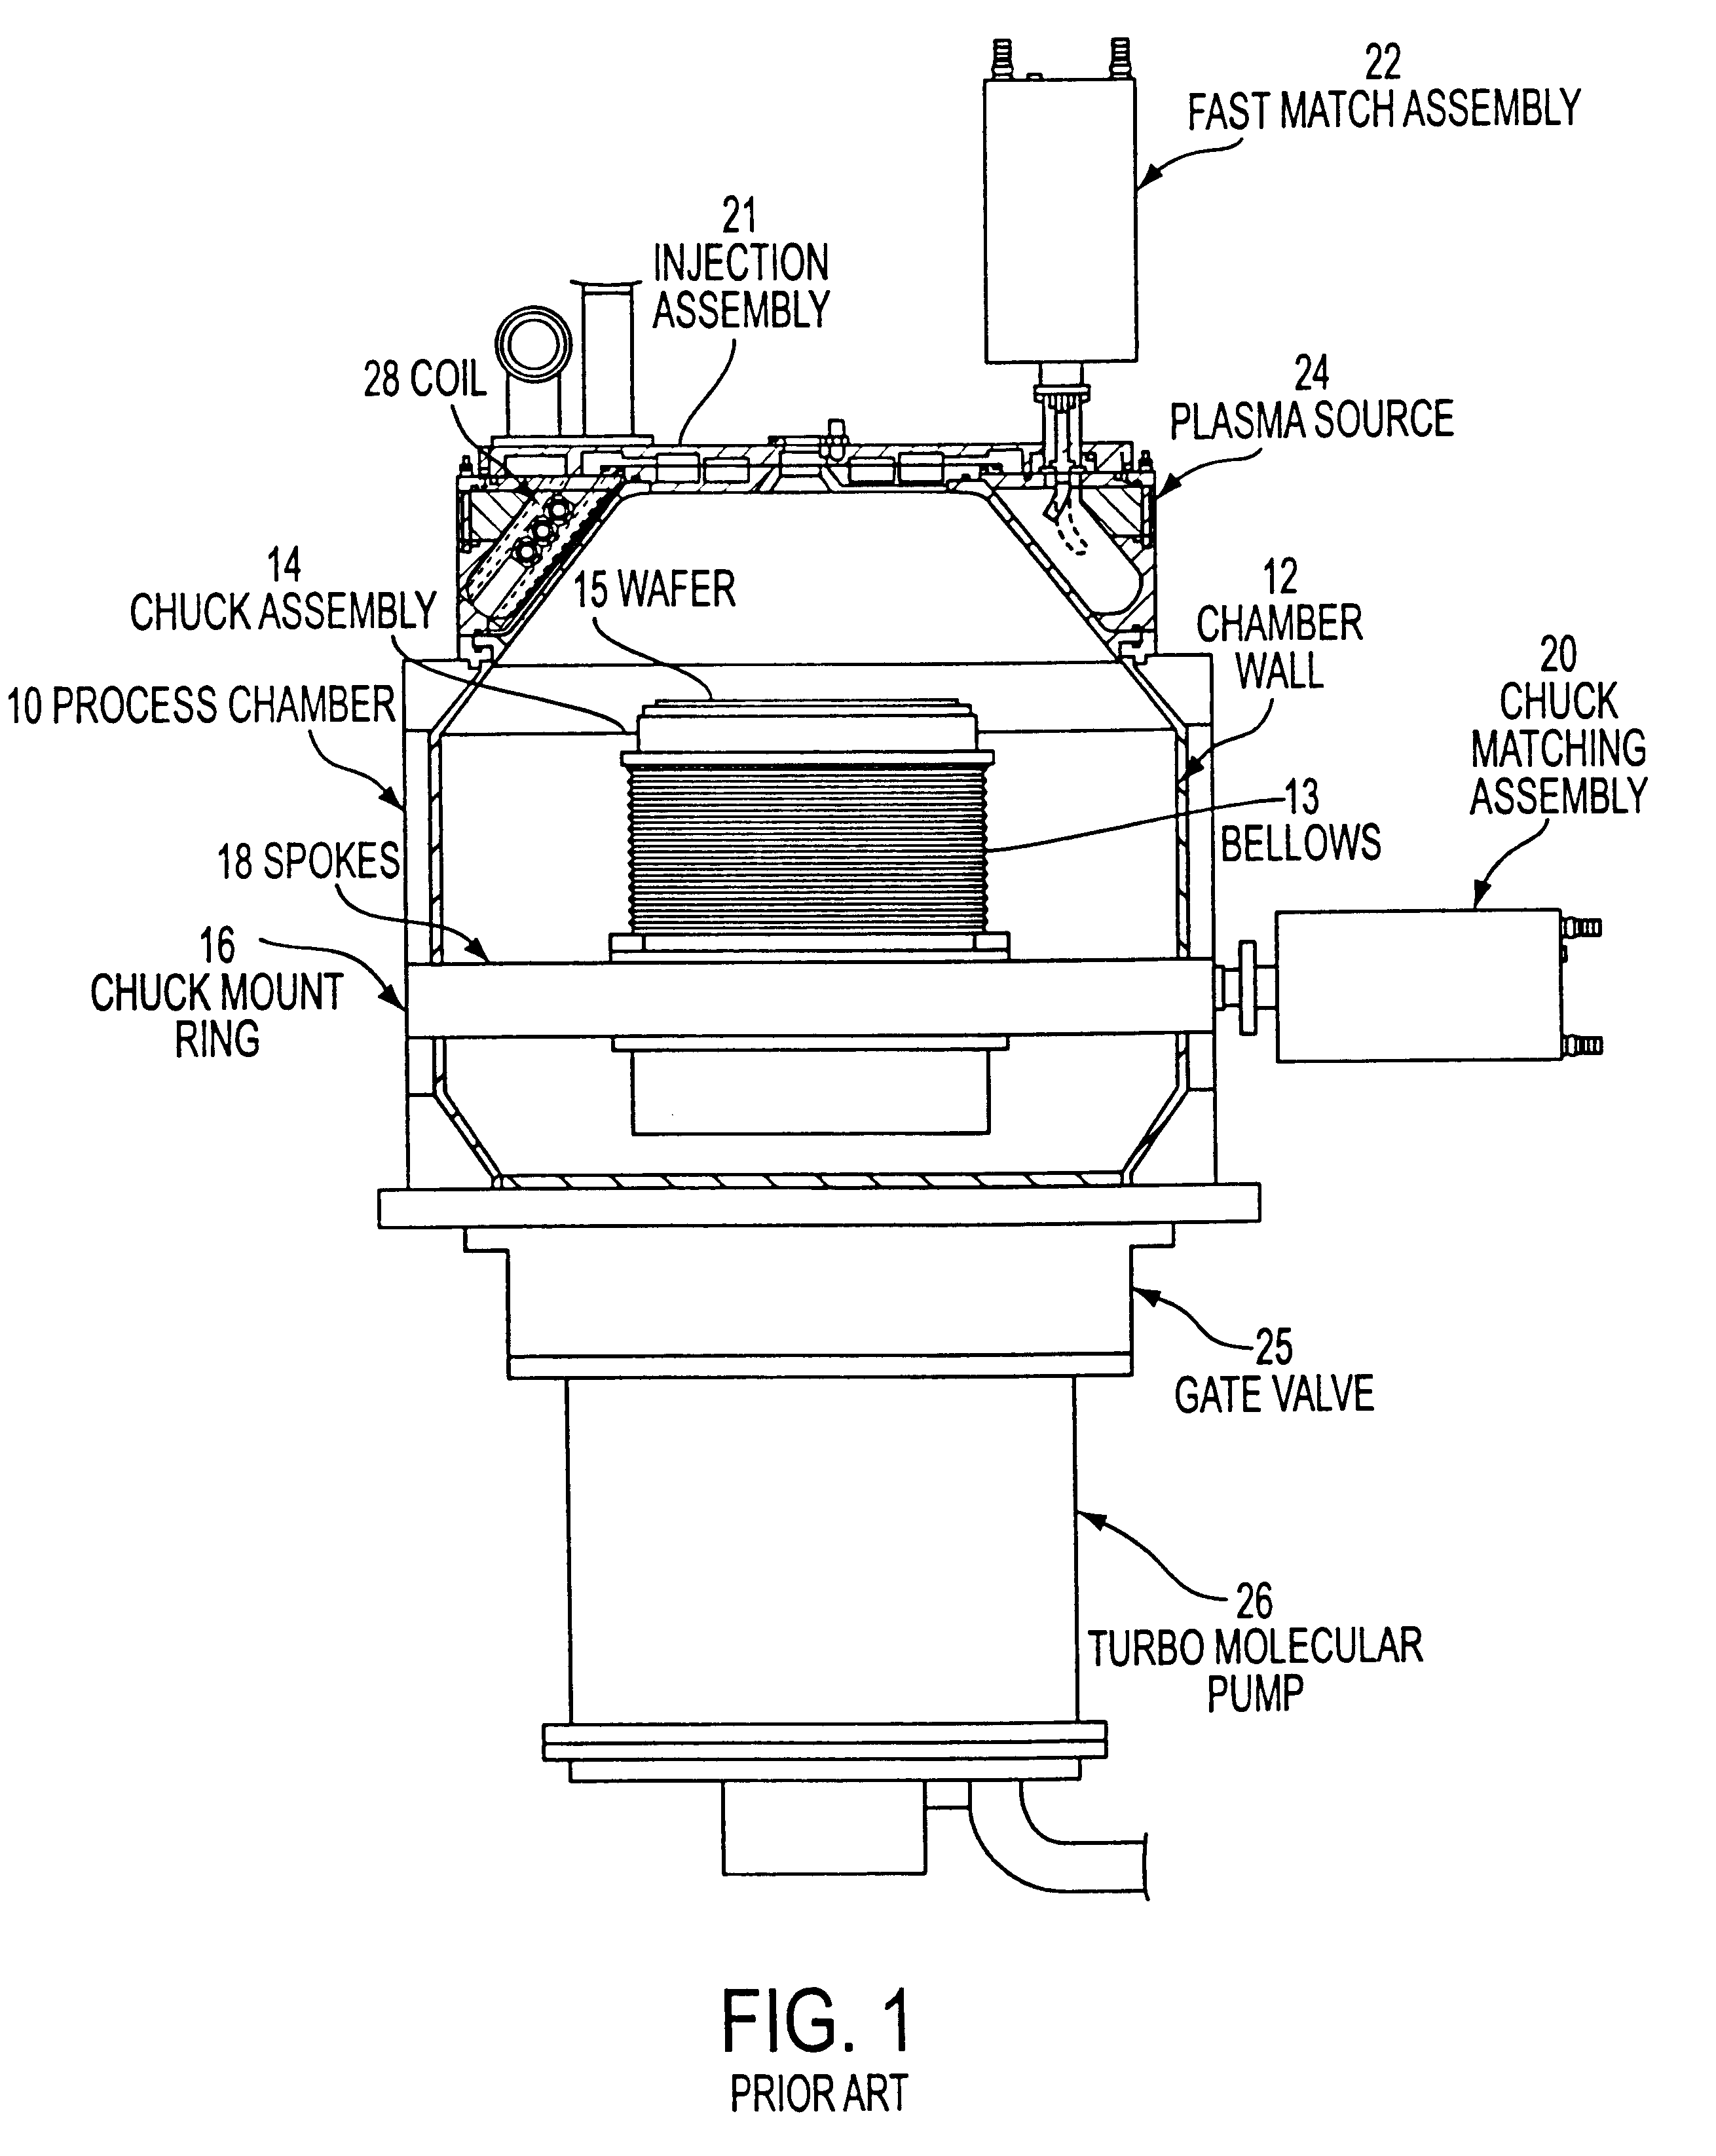 Reduced impedance chamber